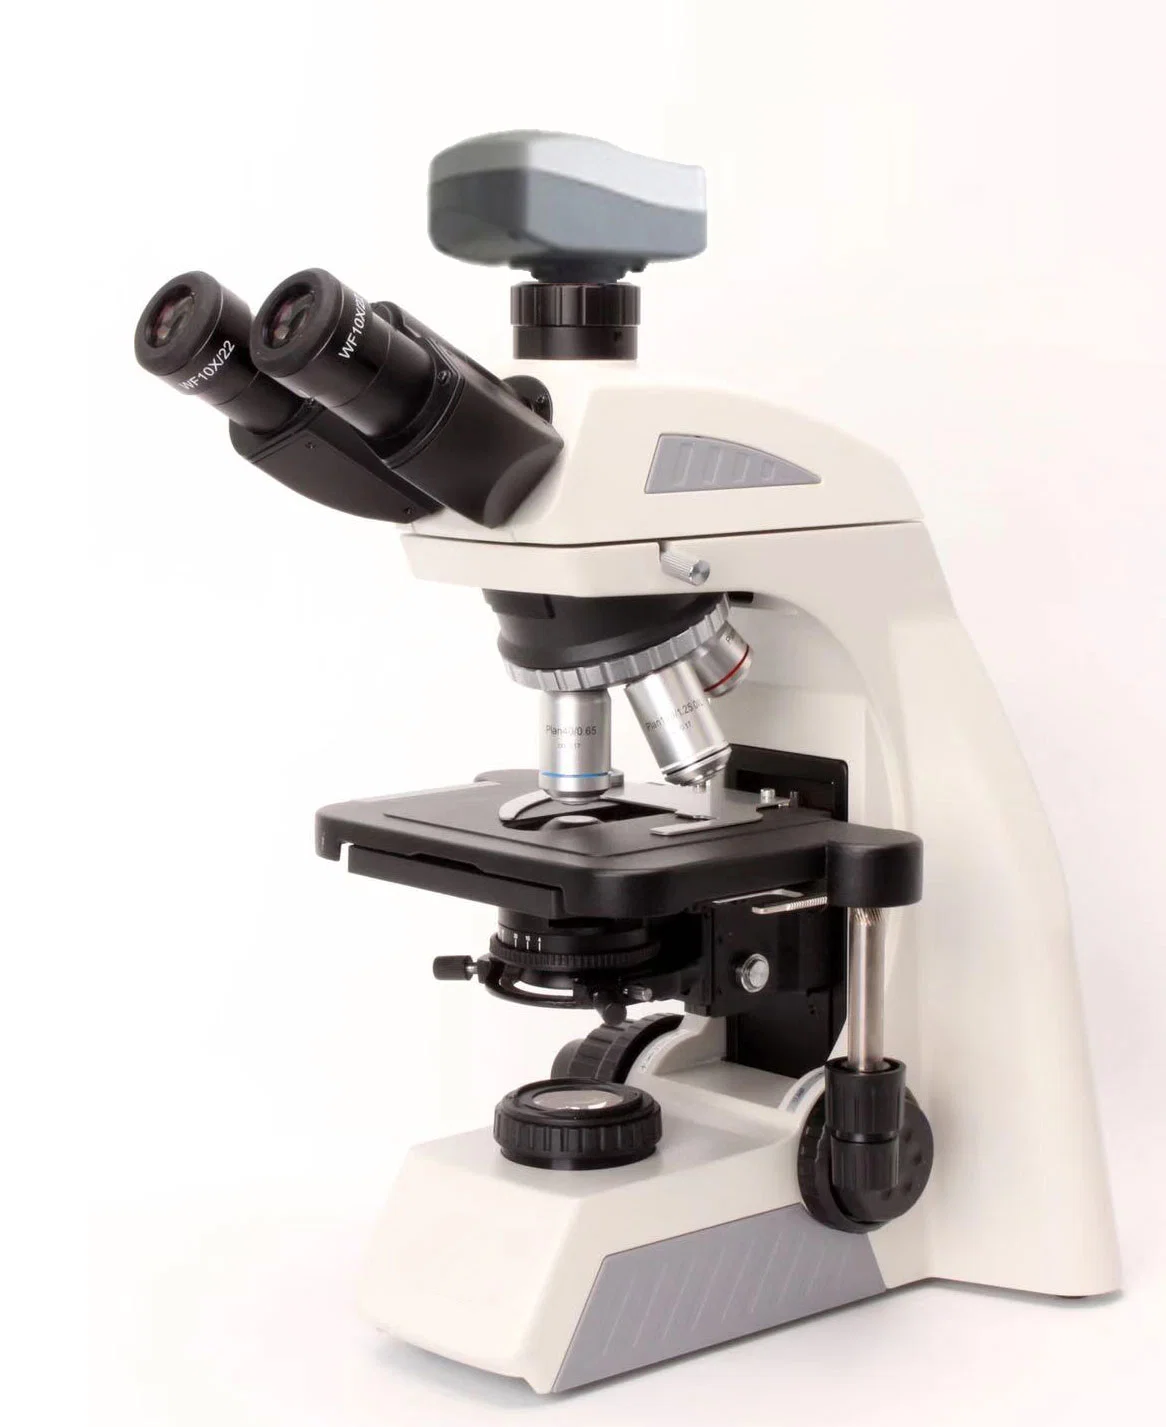 Eastmed Cx610 Top Digital Biological Lab Microscope Price for Sale